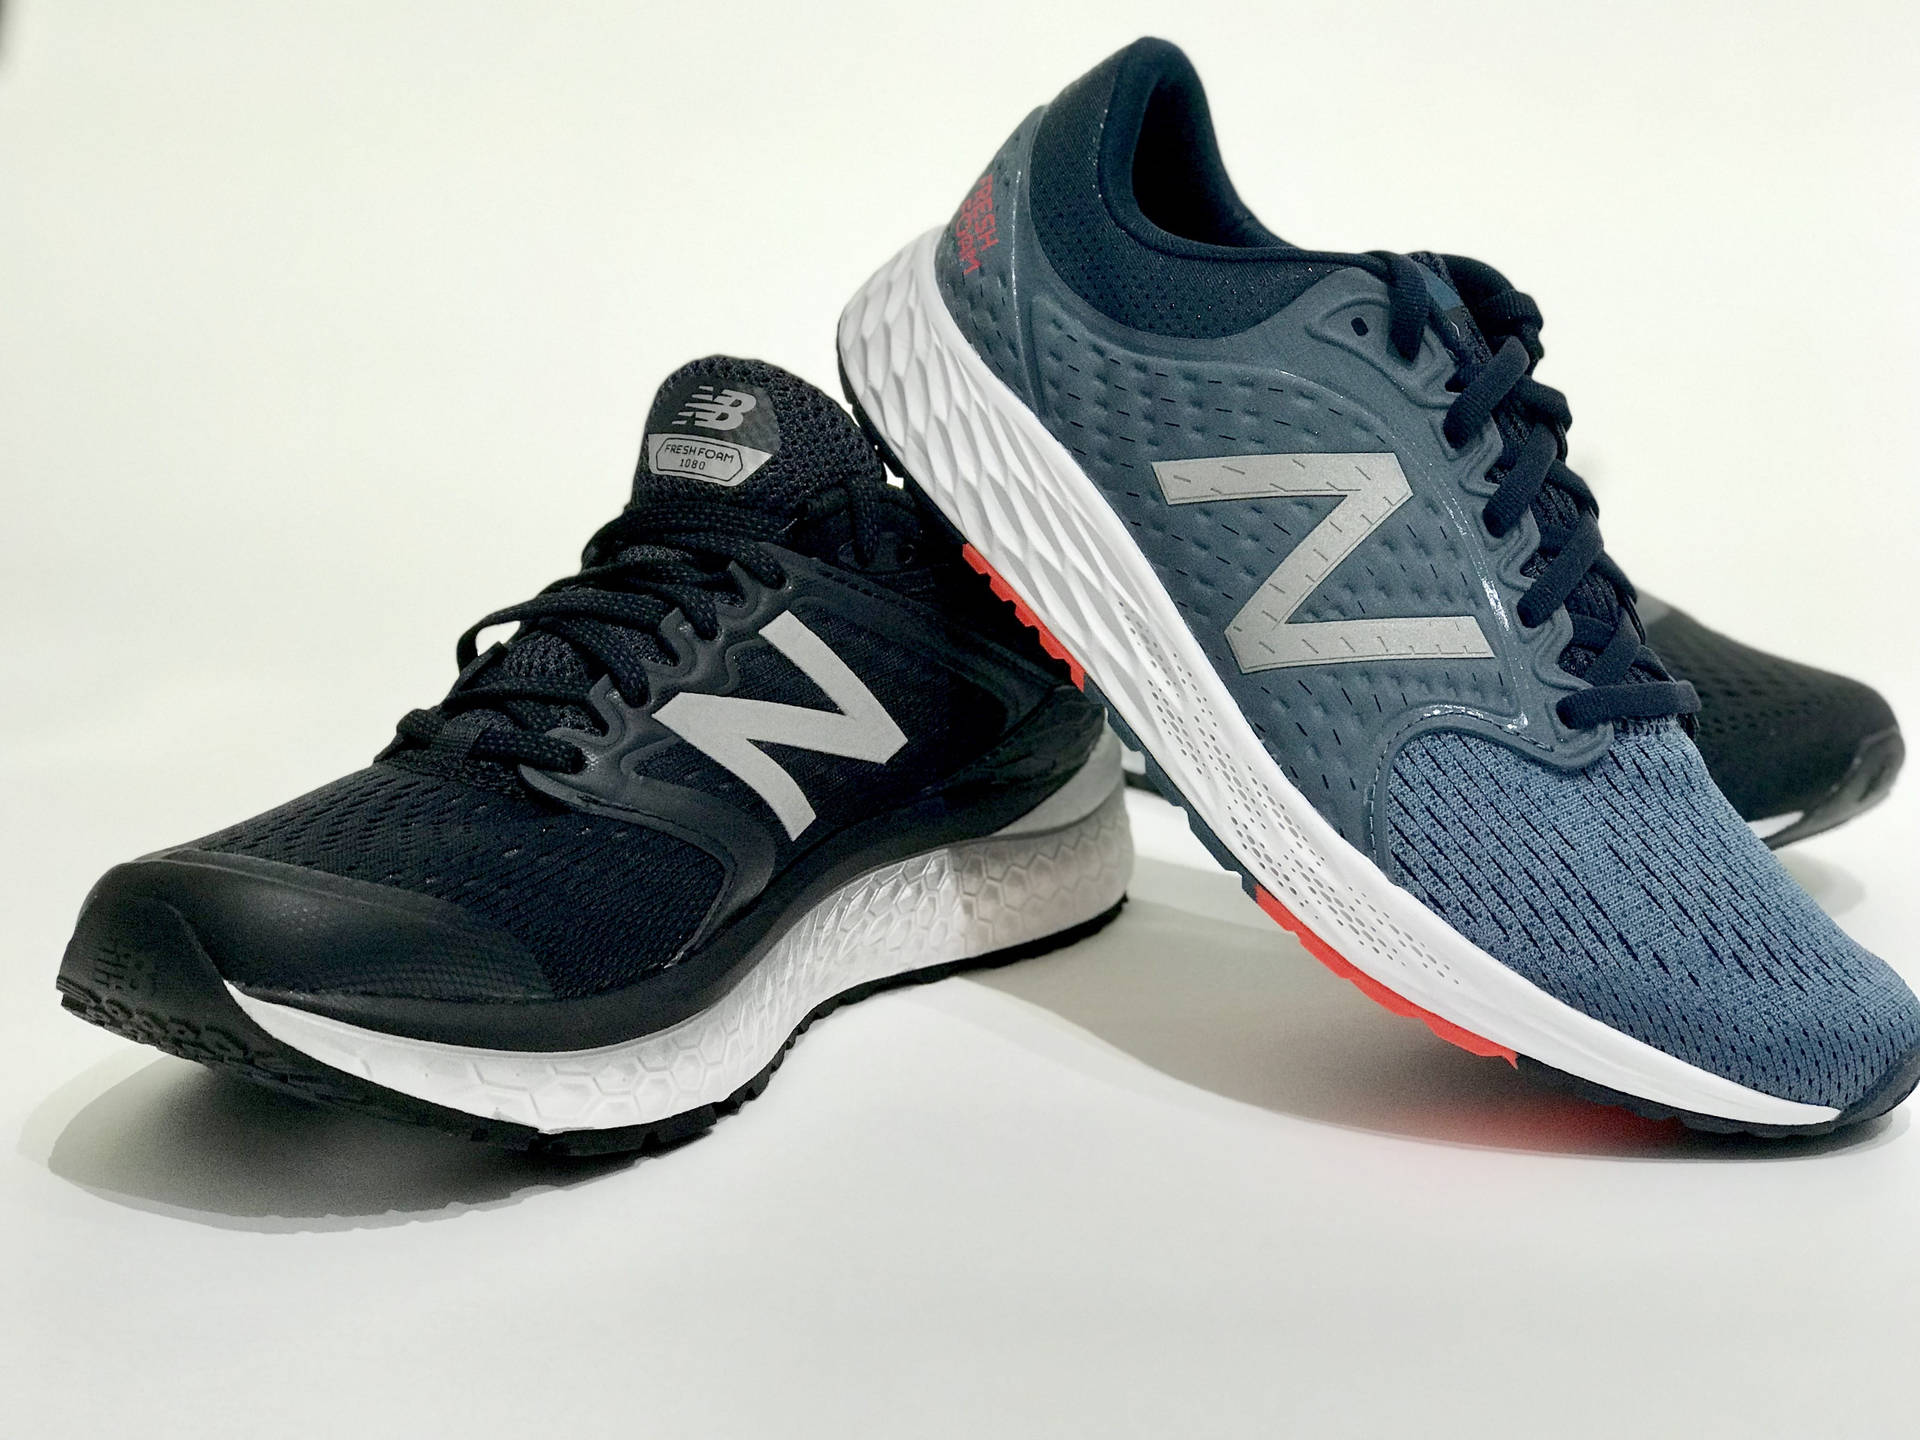 New Balance Different Coloured Pair Wallpaper